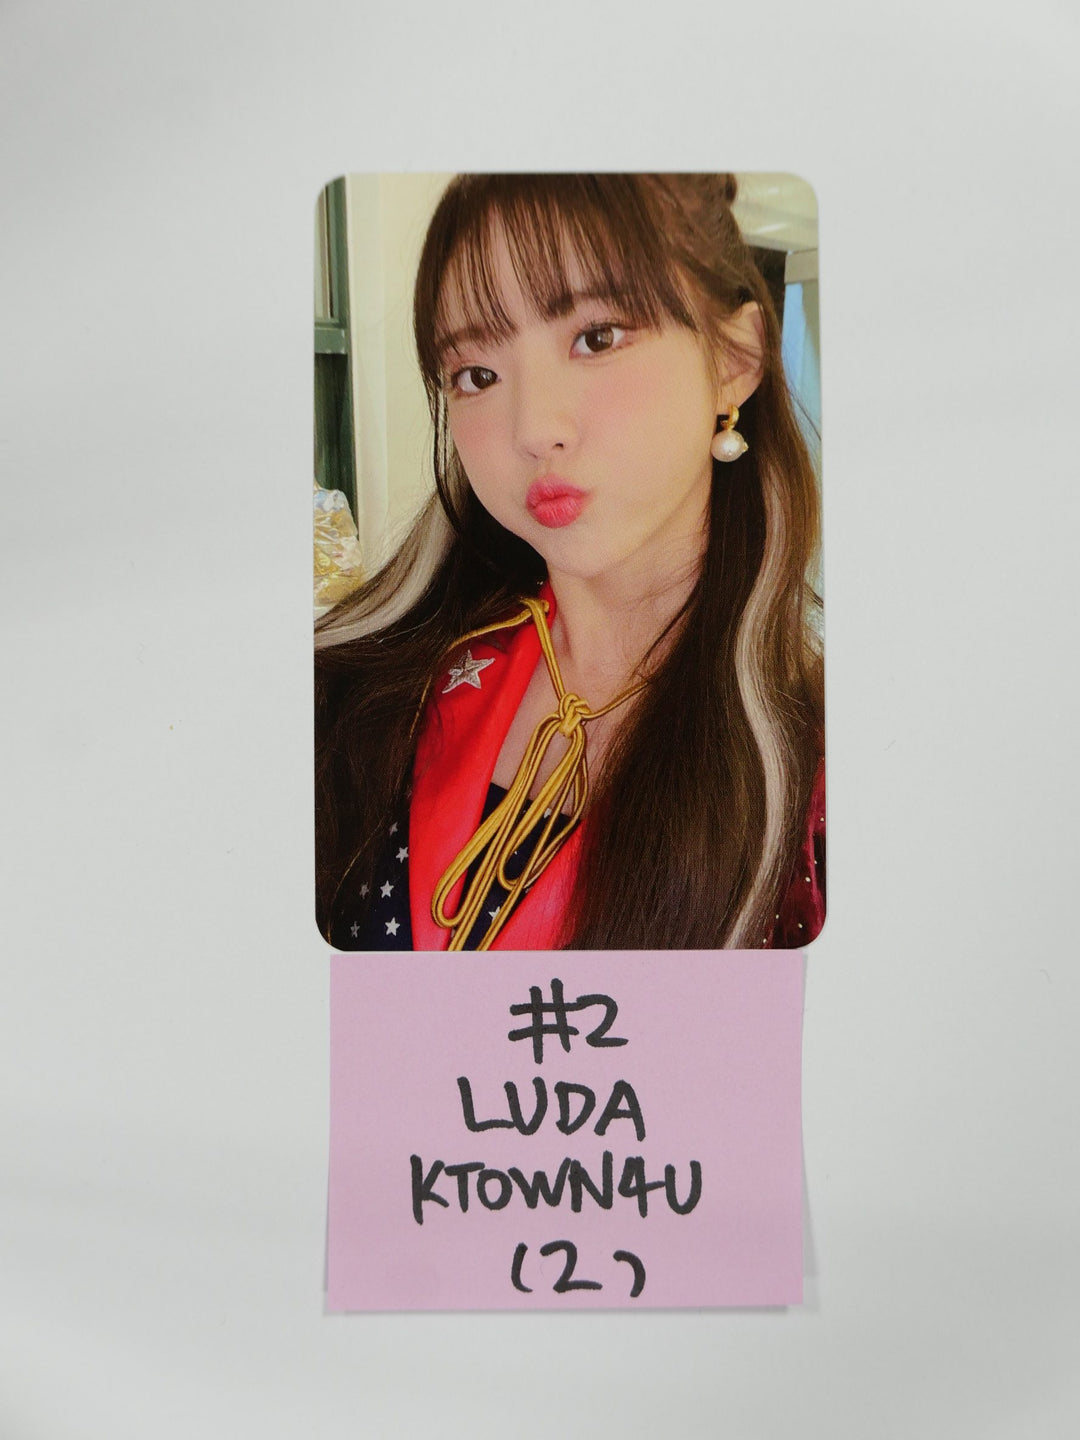 WJSN Chocome "Super Yuppers !" 2nd Single - Ktown4U Fansign Event Photocard